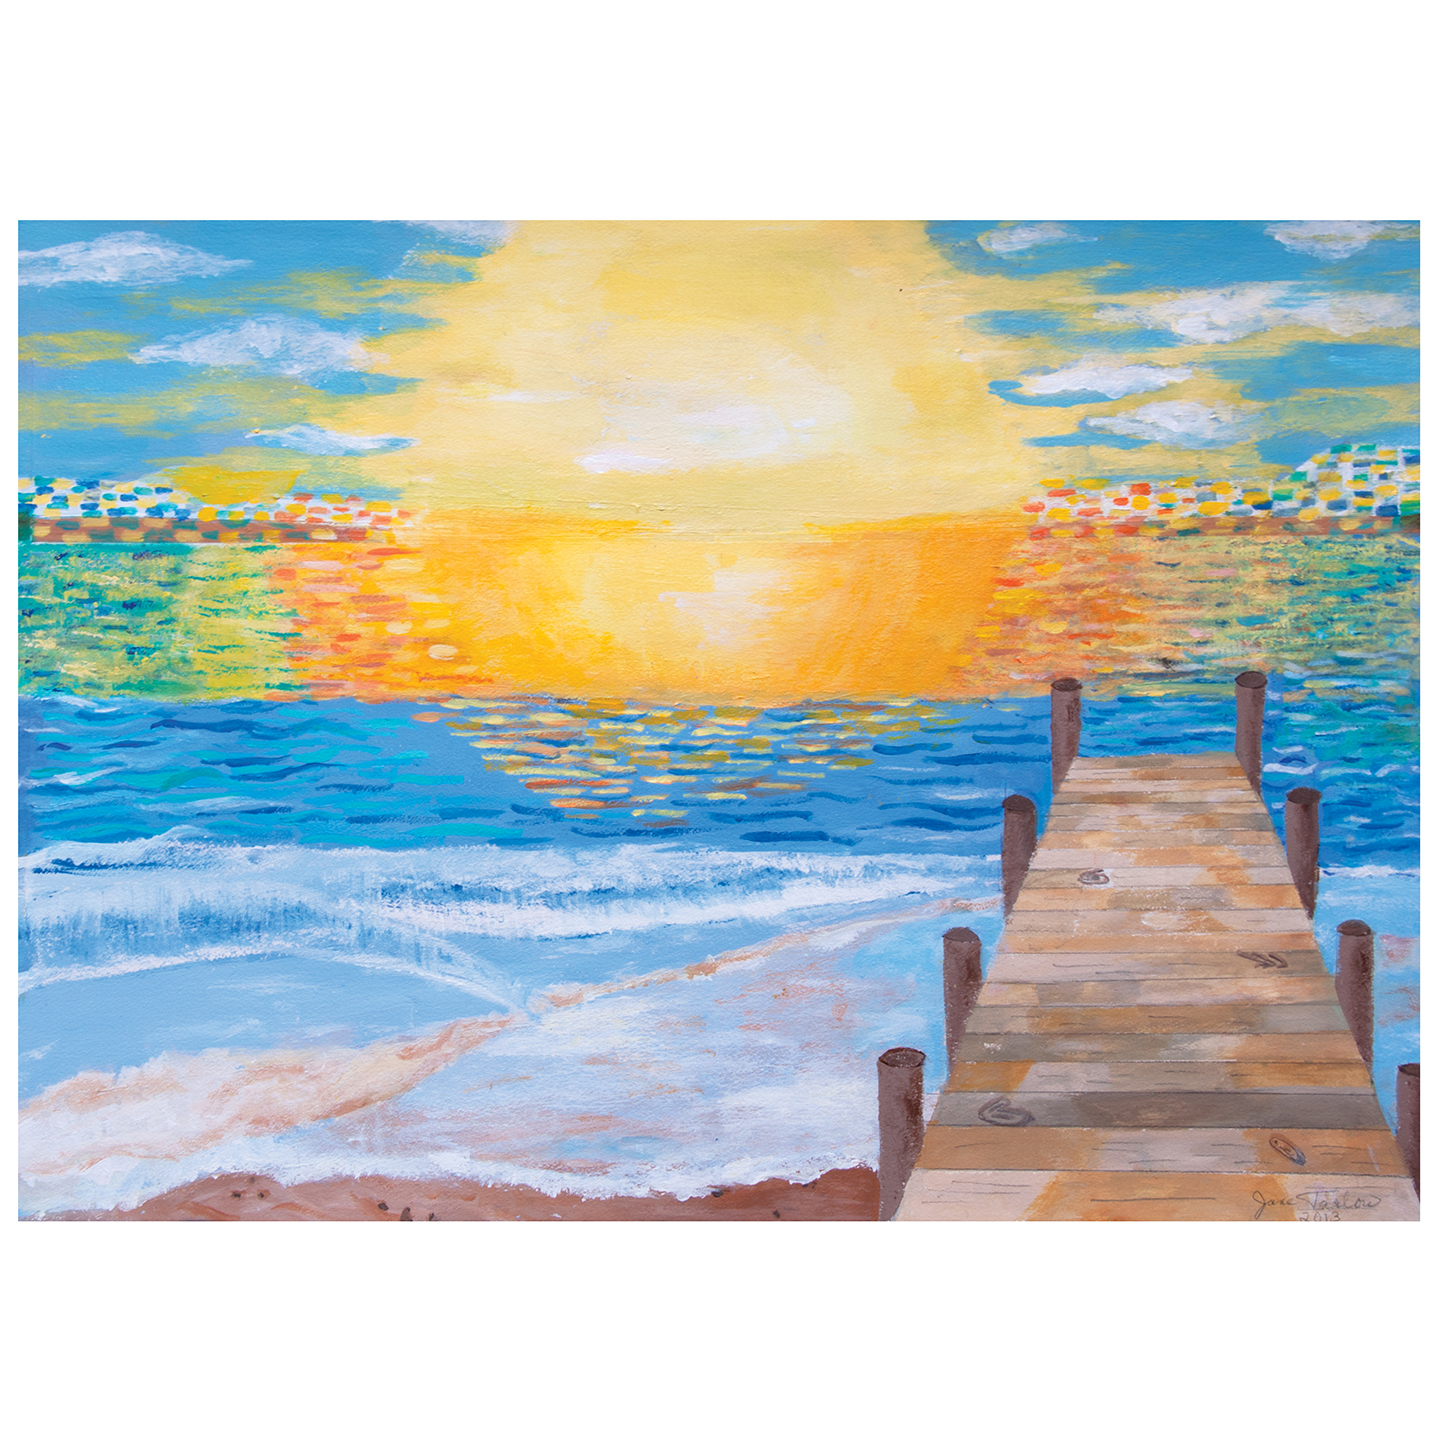 Sunset card or pack by Jane Tarlow